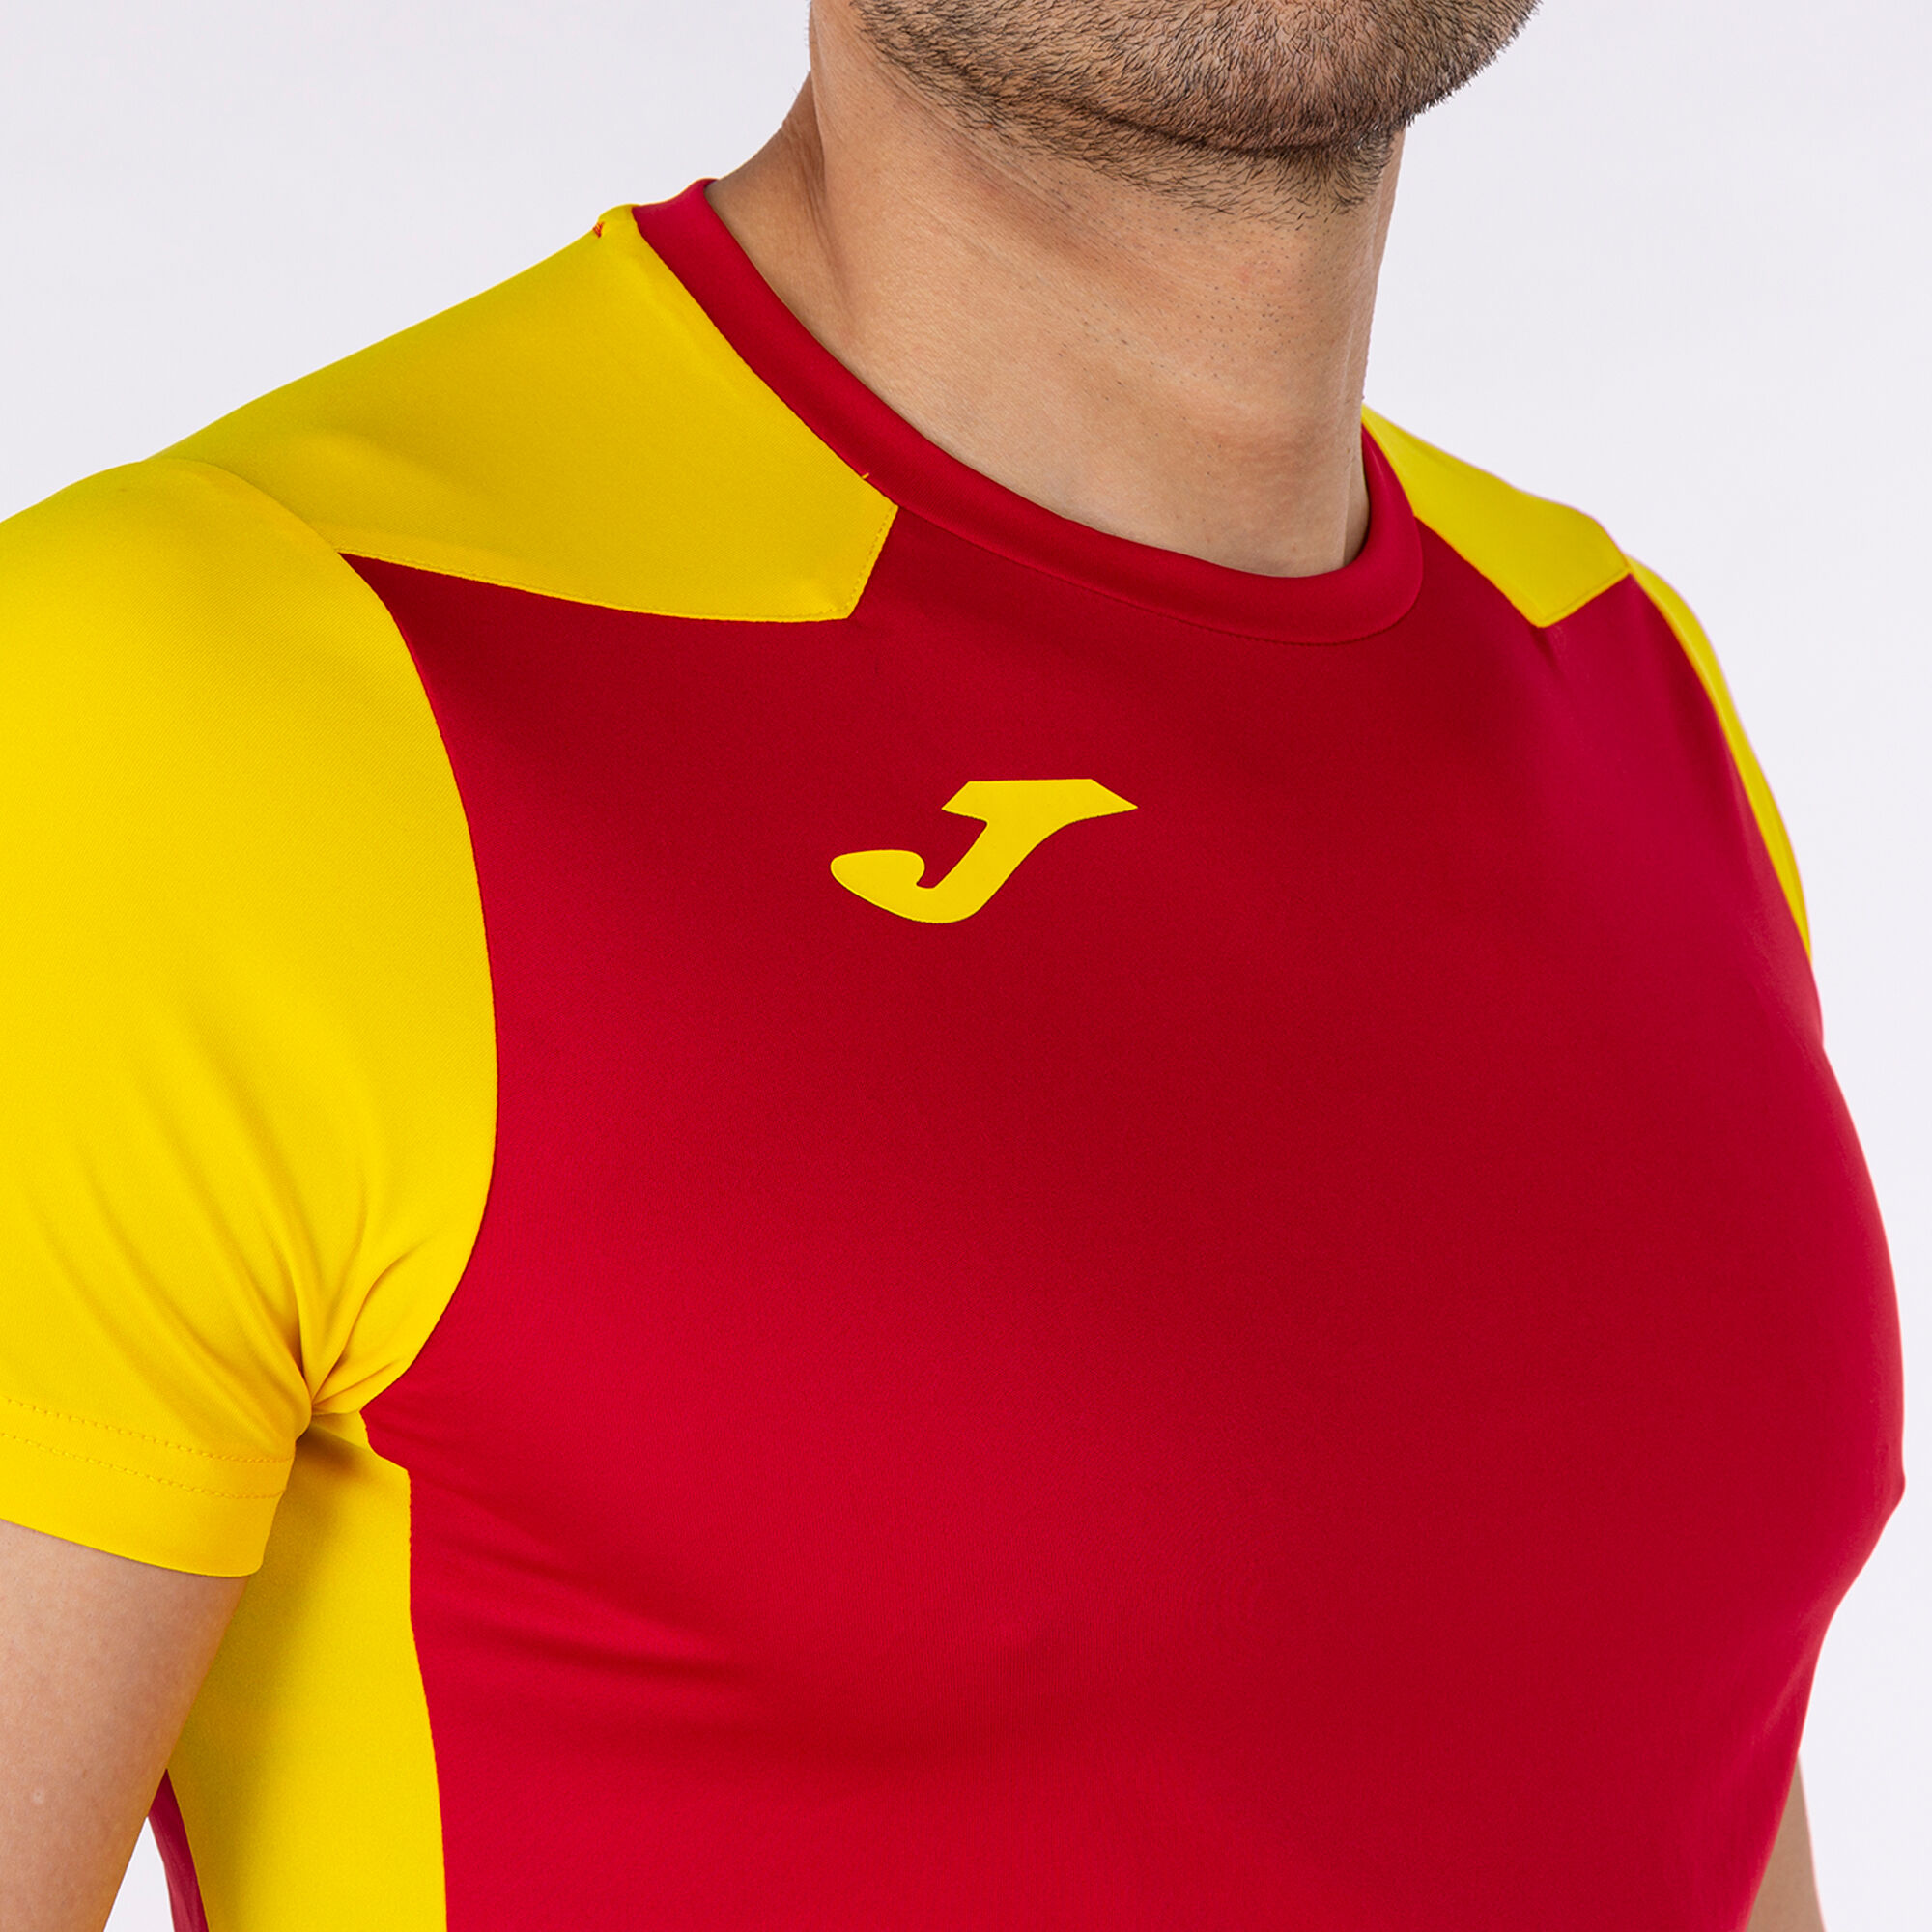 T-Shirt Joma Record II Homme